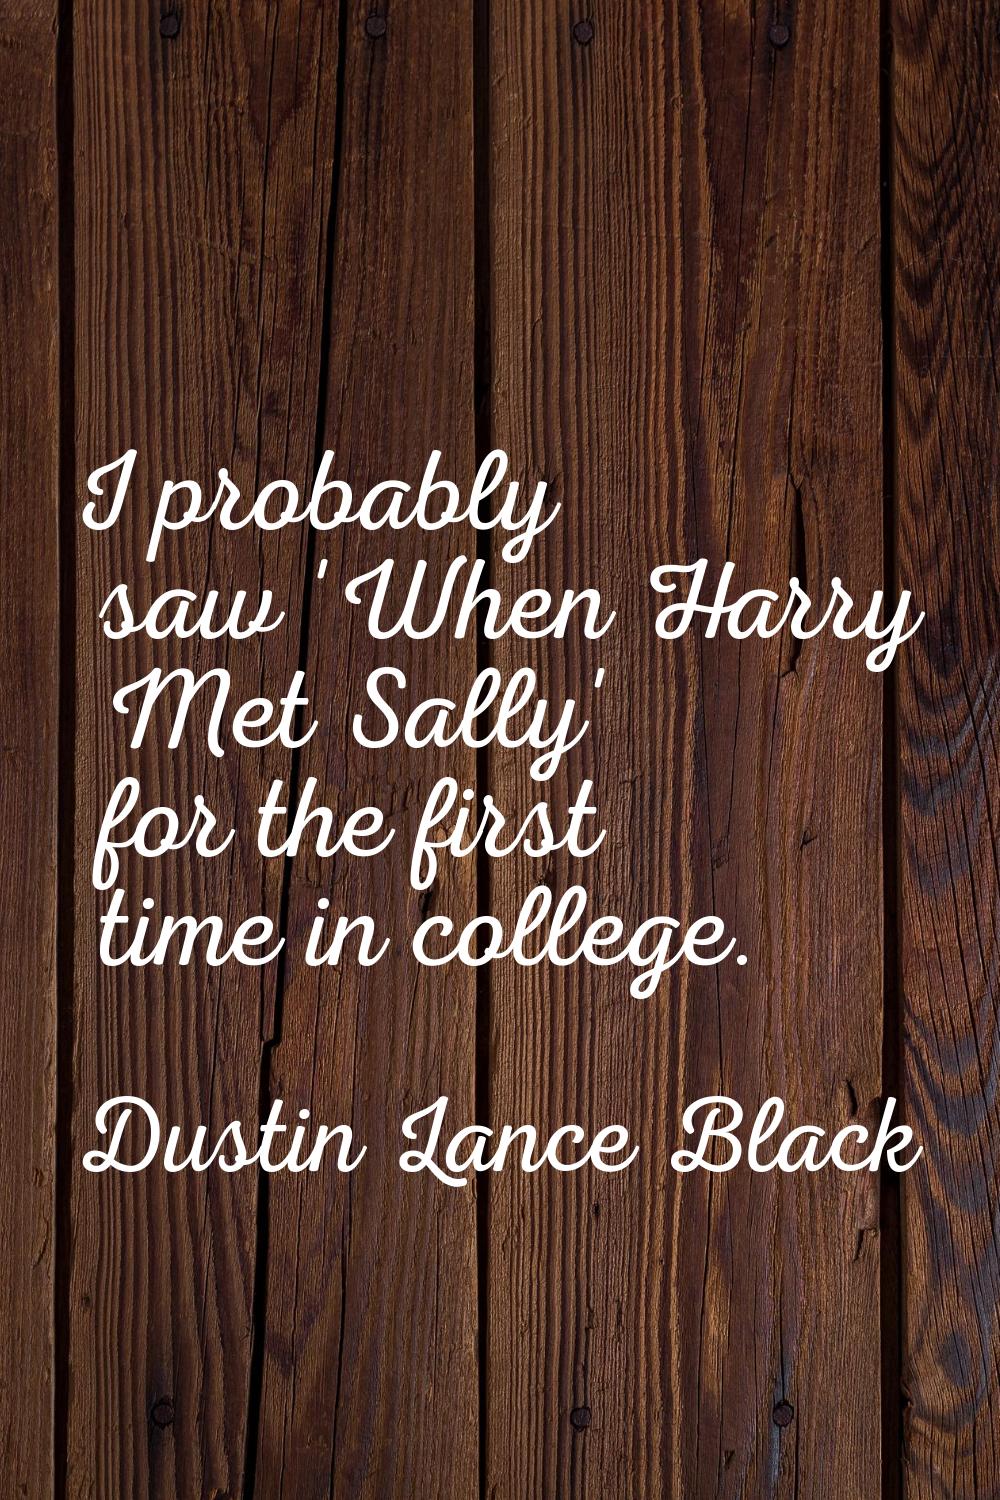 I probably saw 'When Harry Met Sally' for the first time in college.